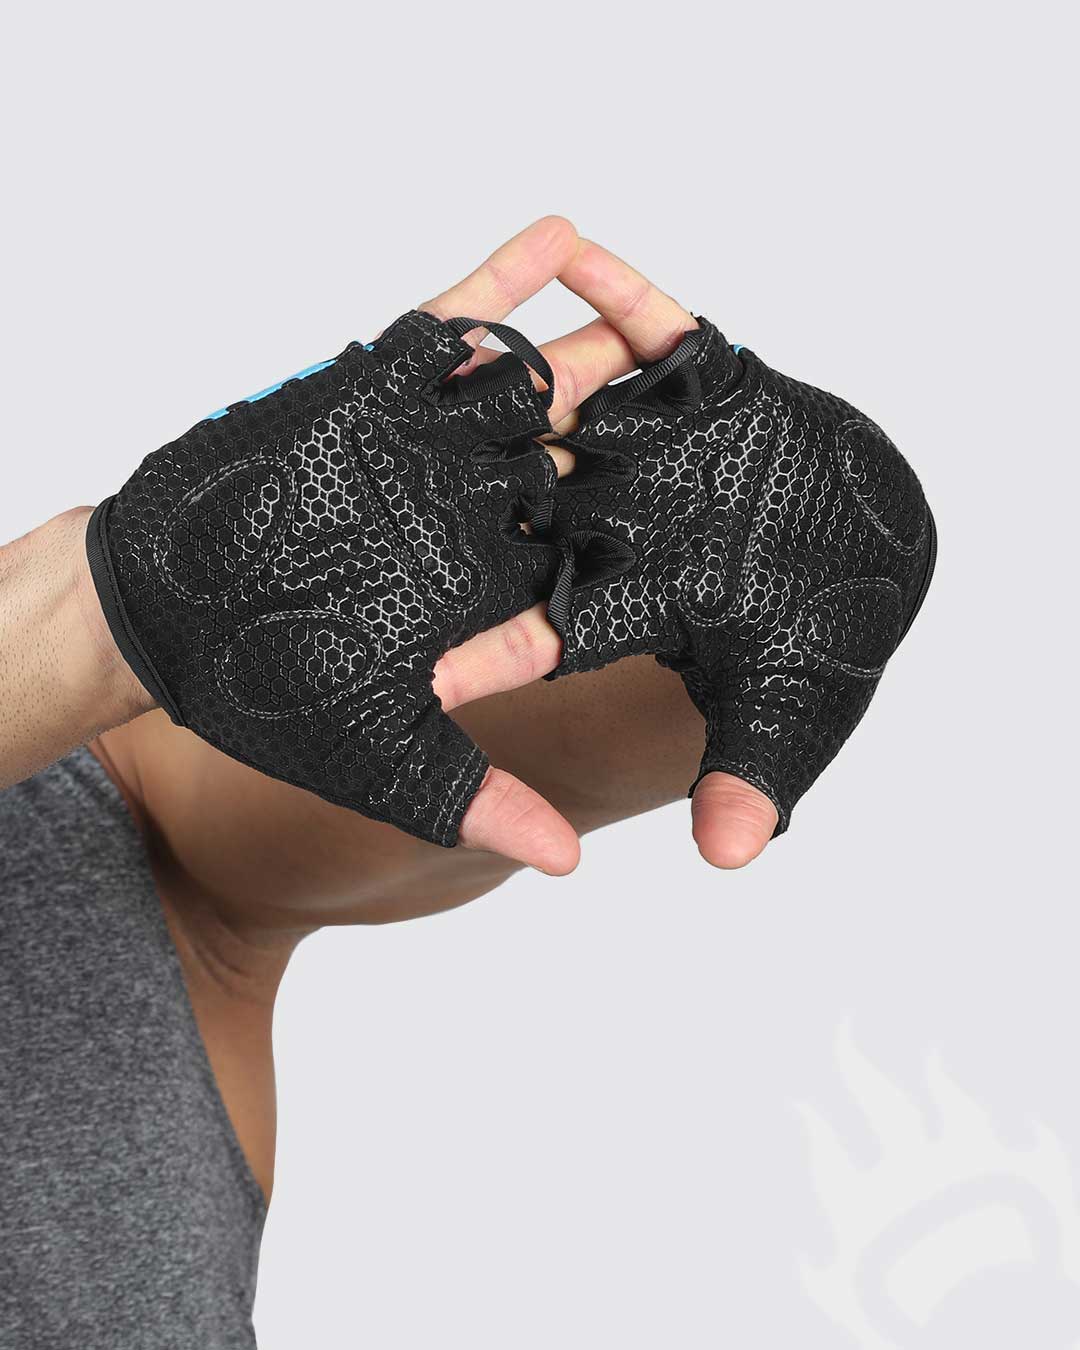 RYMNT Minimal Weight Lifting Gloves,Short Micro Workout Gloves Grip Pads  with Full Palm Protection & Extra Grip for Men Women  Weightlifting,Gym,Exercise Training Black Small (Women)/XS(Men)